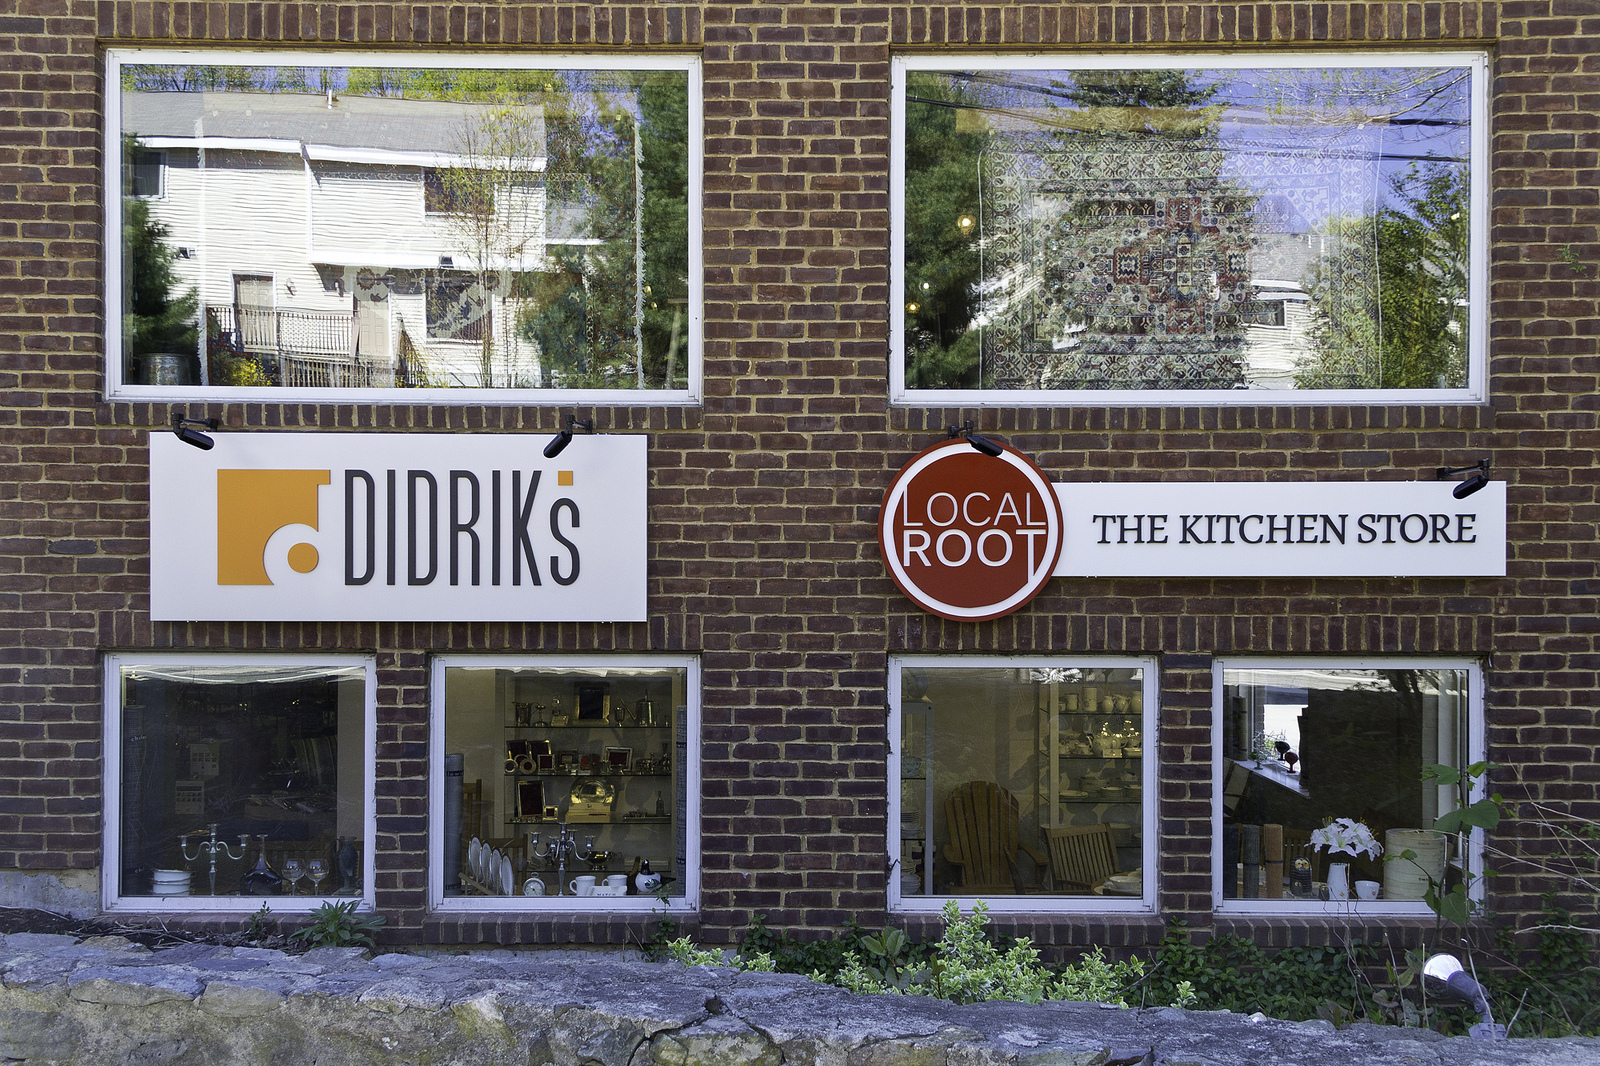 Didriks and Local Root storefront at the Mill at Newton Lower Falls